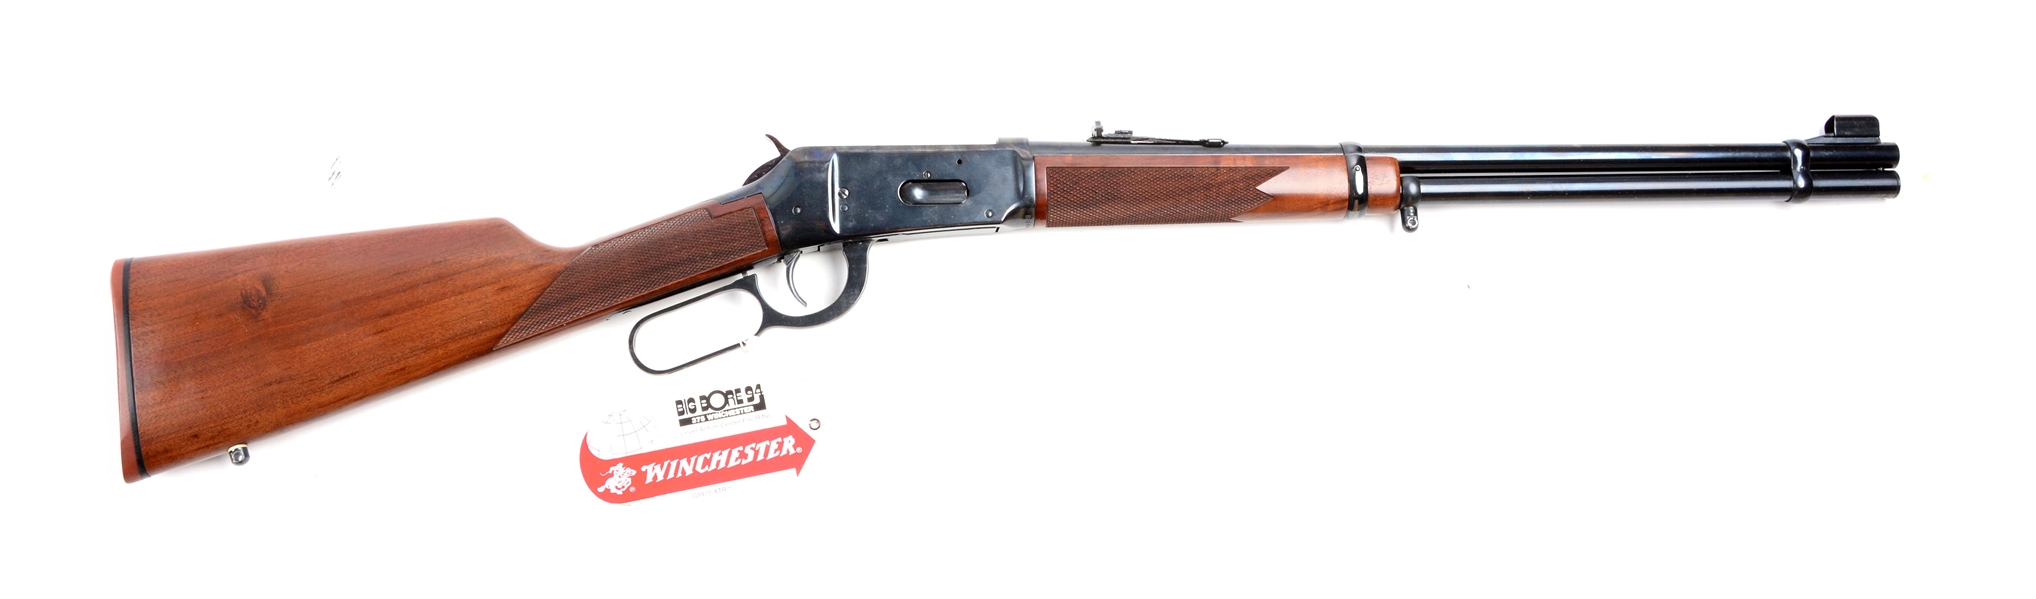 (M) BOXED WINCHESTER BIG BORE 94 .375 LEVER ACTION RIFLE.